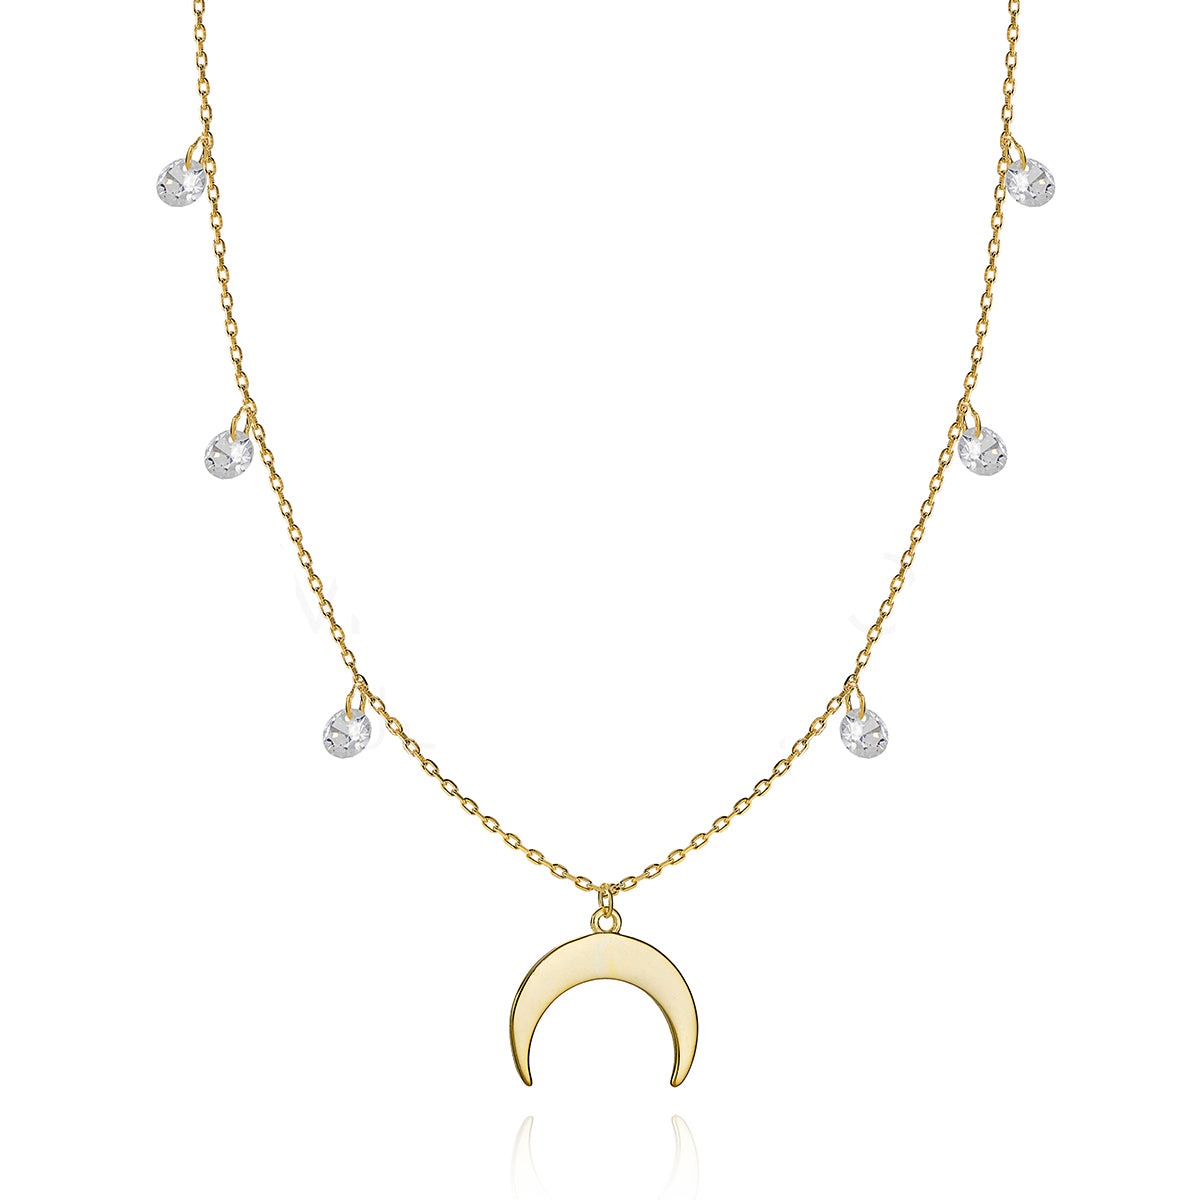 Half-moon Gold Plated Pendant Necklace with Cubic Zirconia